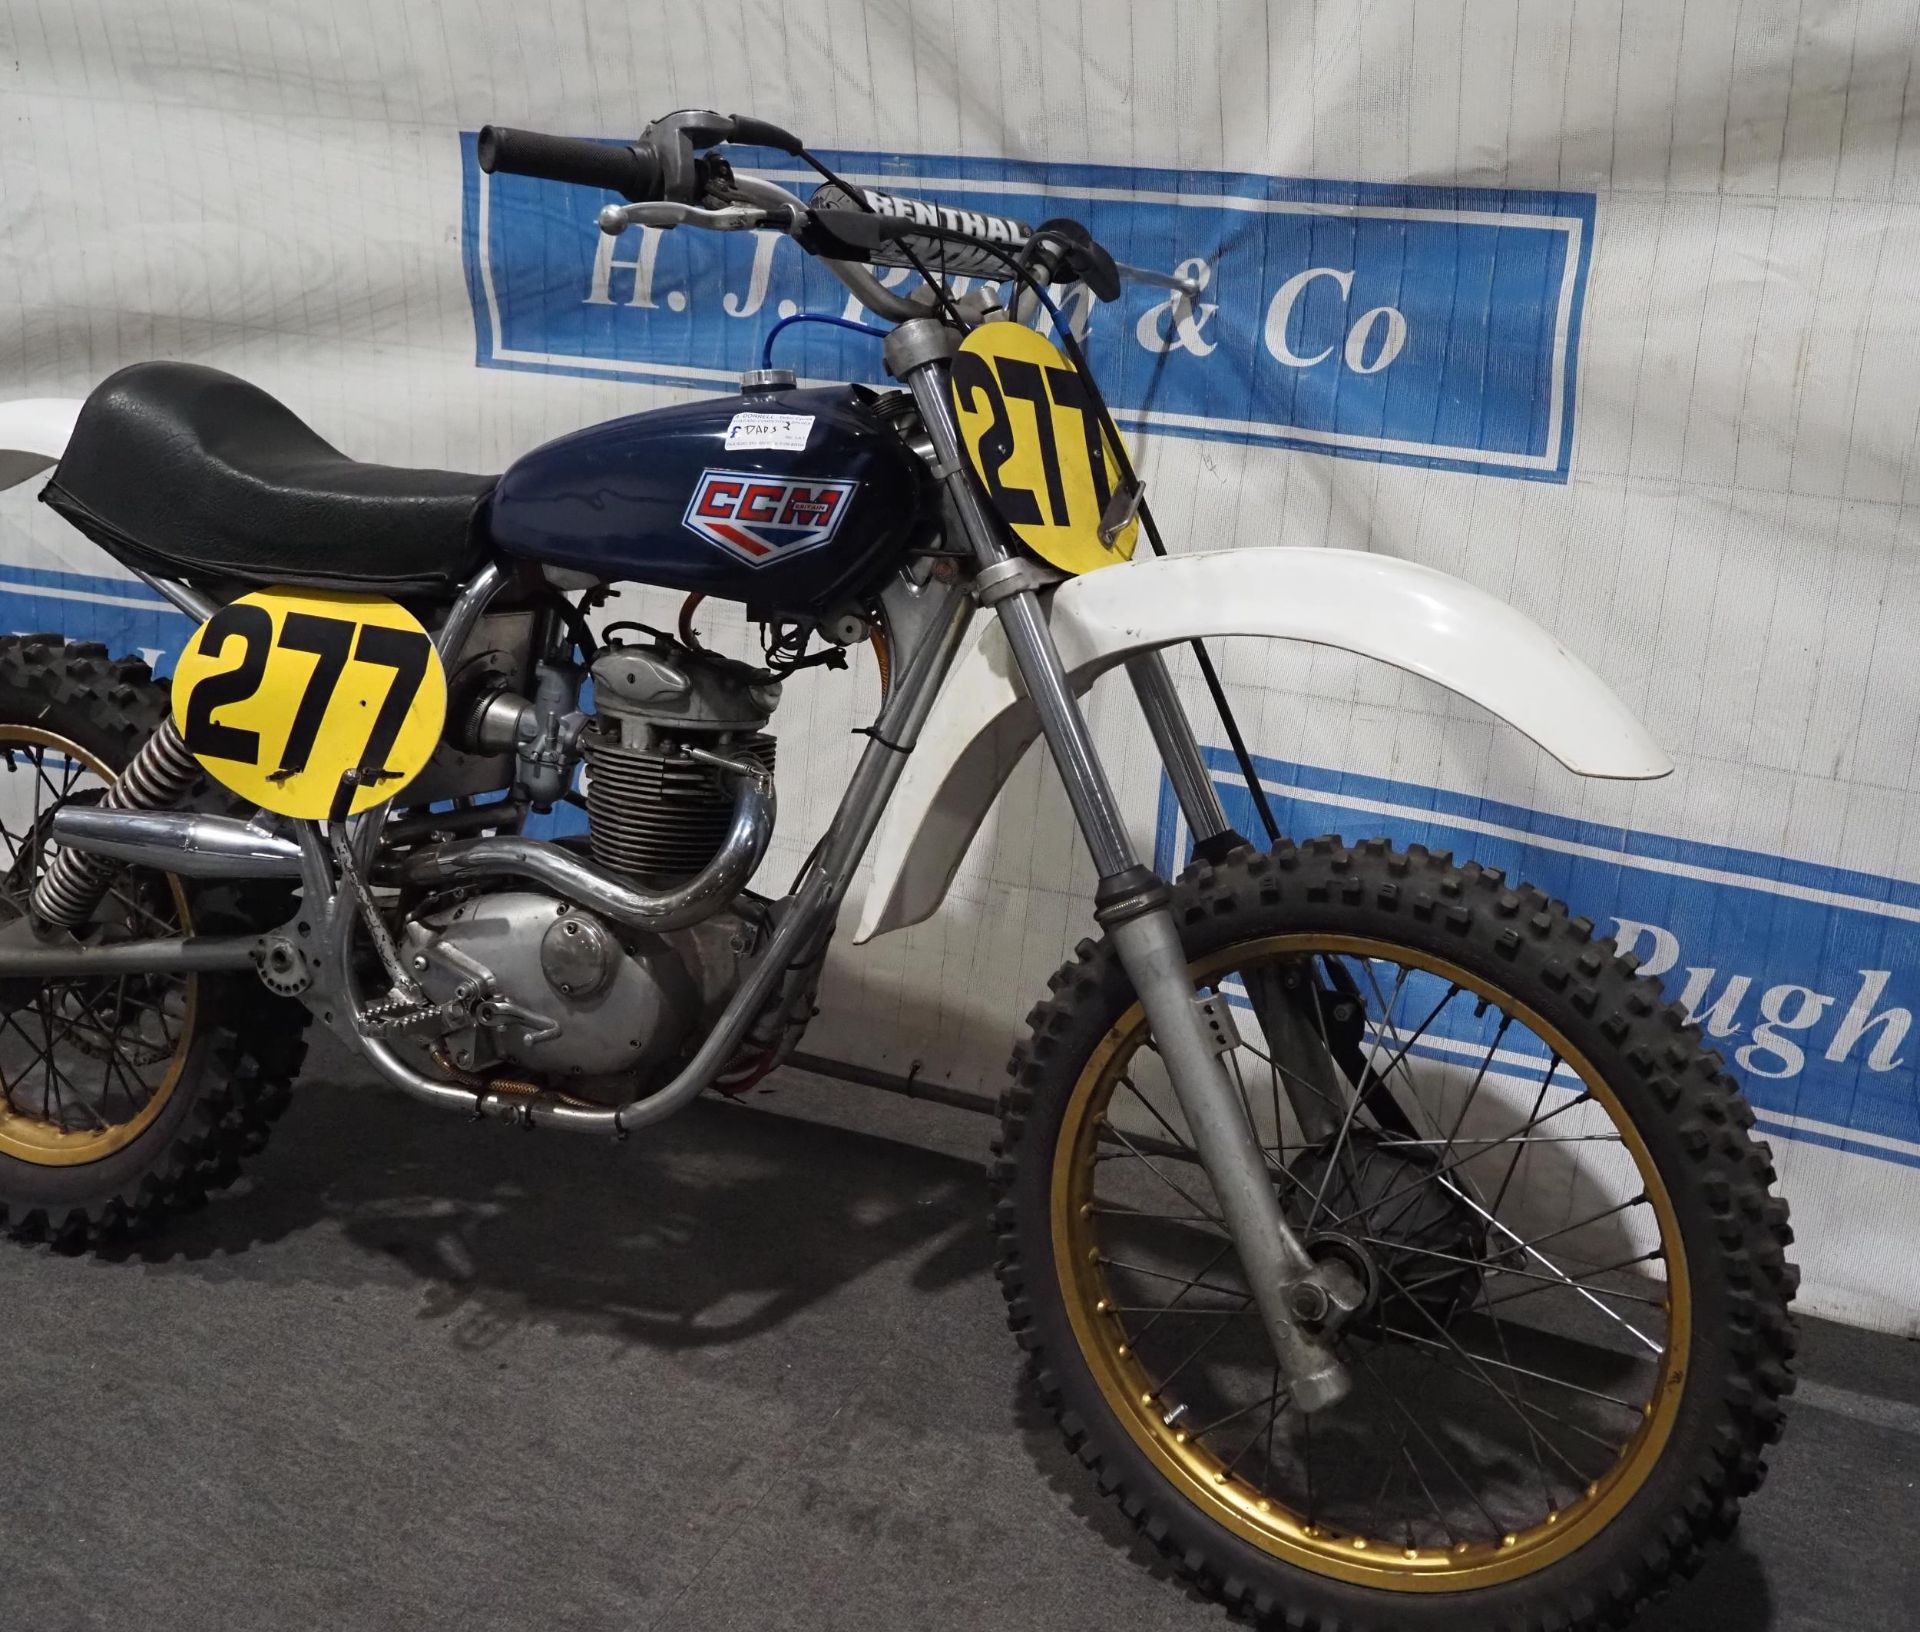 CCM dirt motorcycle. 1979. 410cc short stroke engine. Engine No. CB32905. Part of the Alec Dorrell - Image 5 of 12